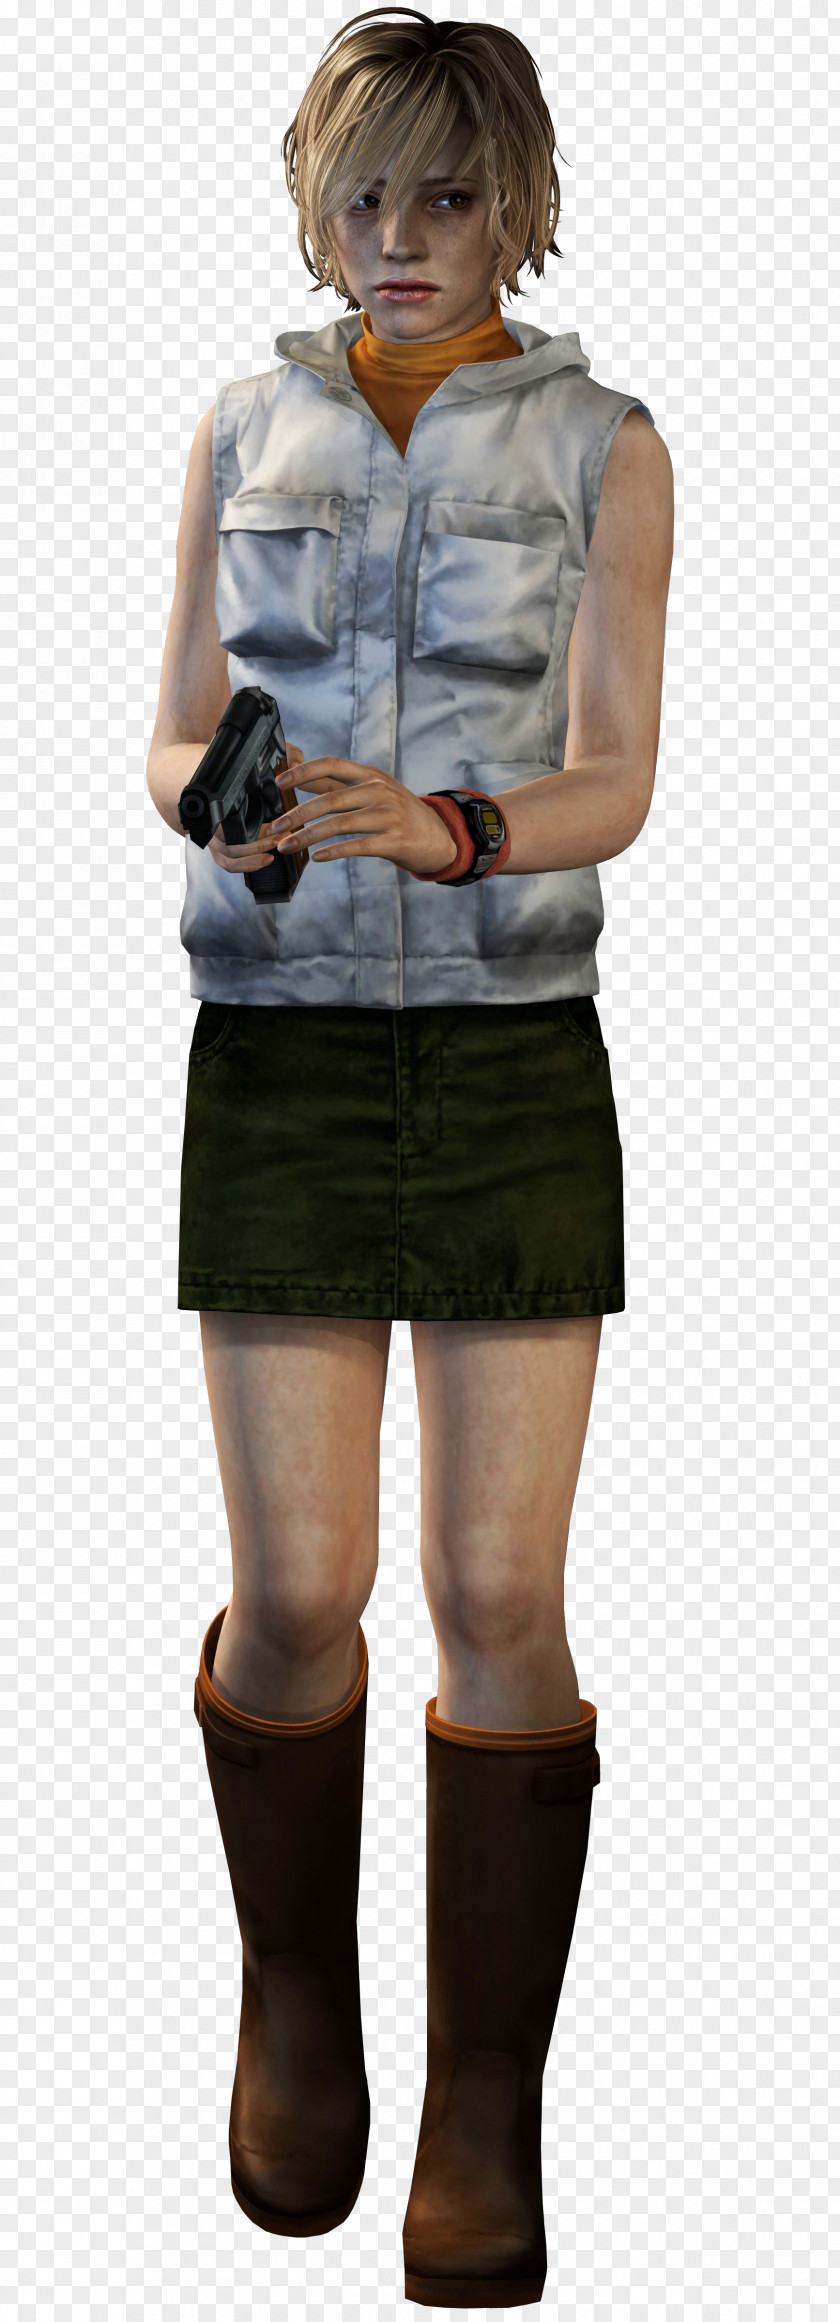 Colossus Of Rhodes Silent Hill 3 Heather Mason 2 Alessa Gillespie PNG